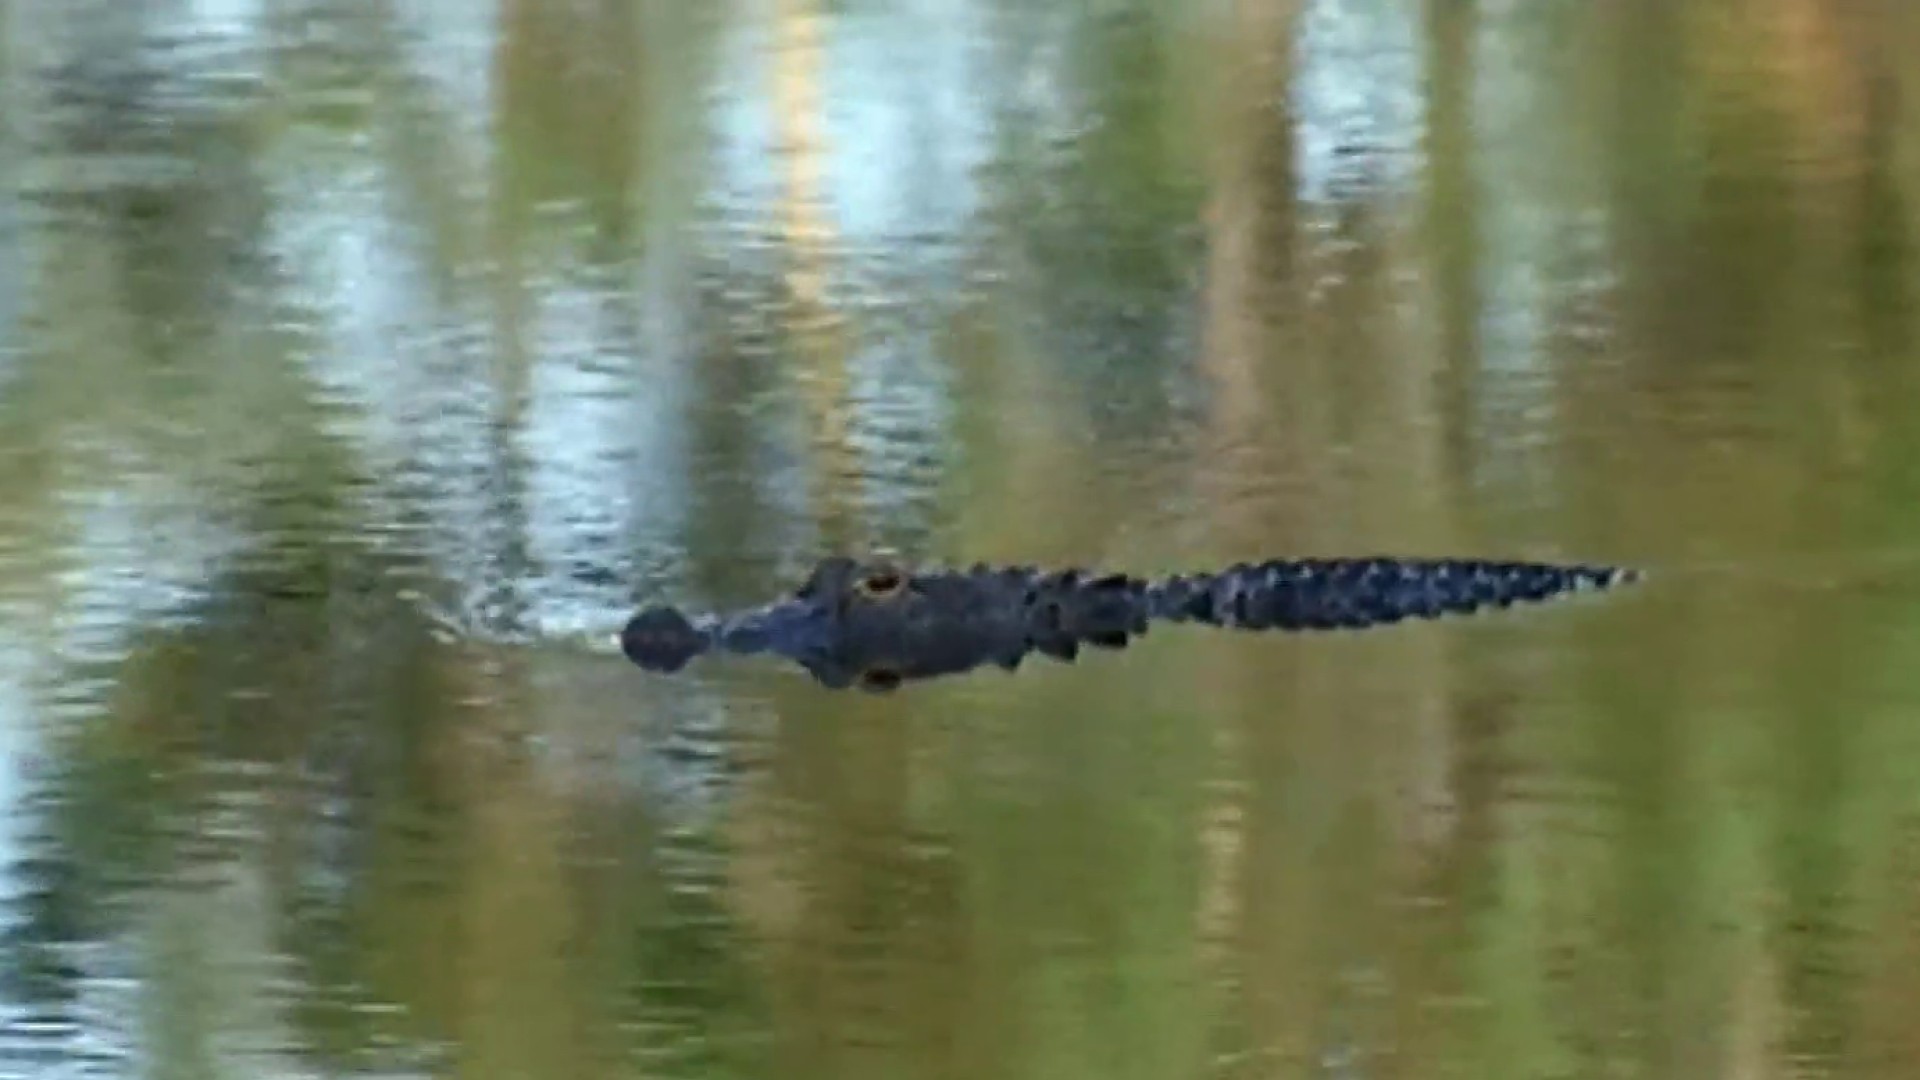 226 alligators removed from Disney World since toddler's death 5 years ago